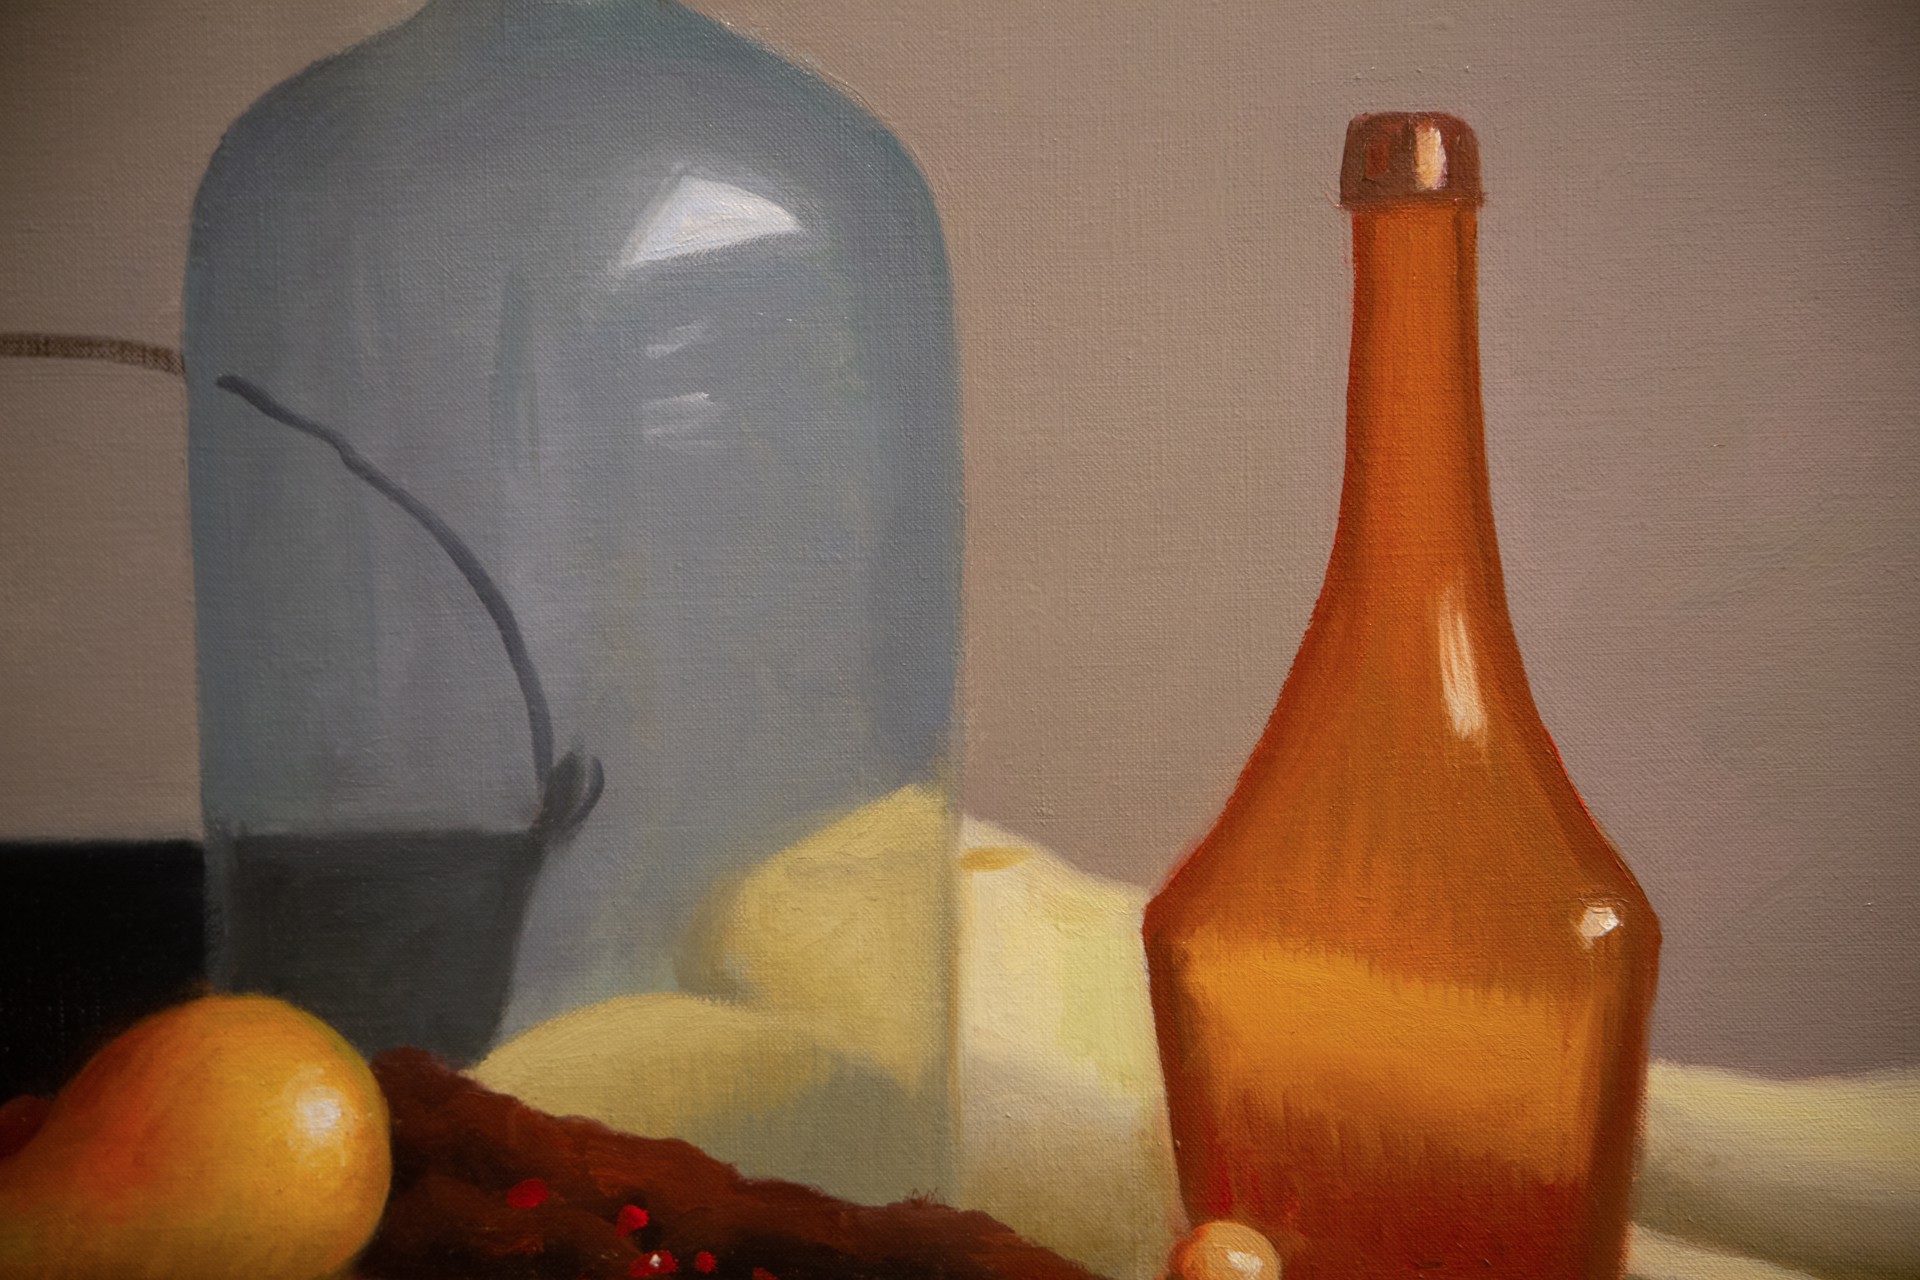 Arrangement with Two Bottles and an Iron Kettle by Robert Douglas Hunter